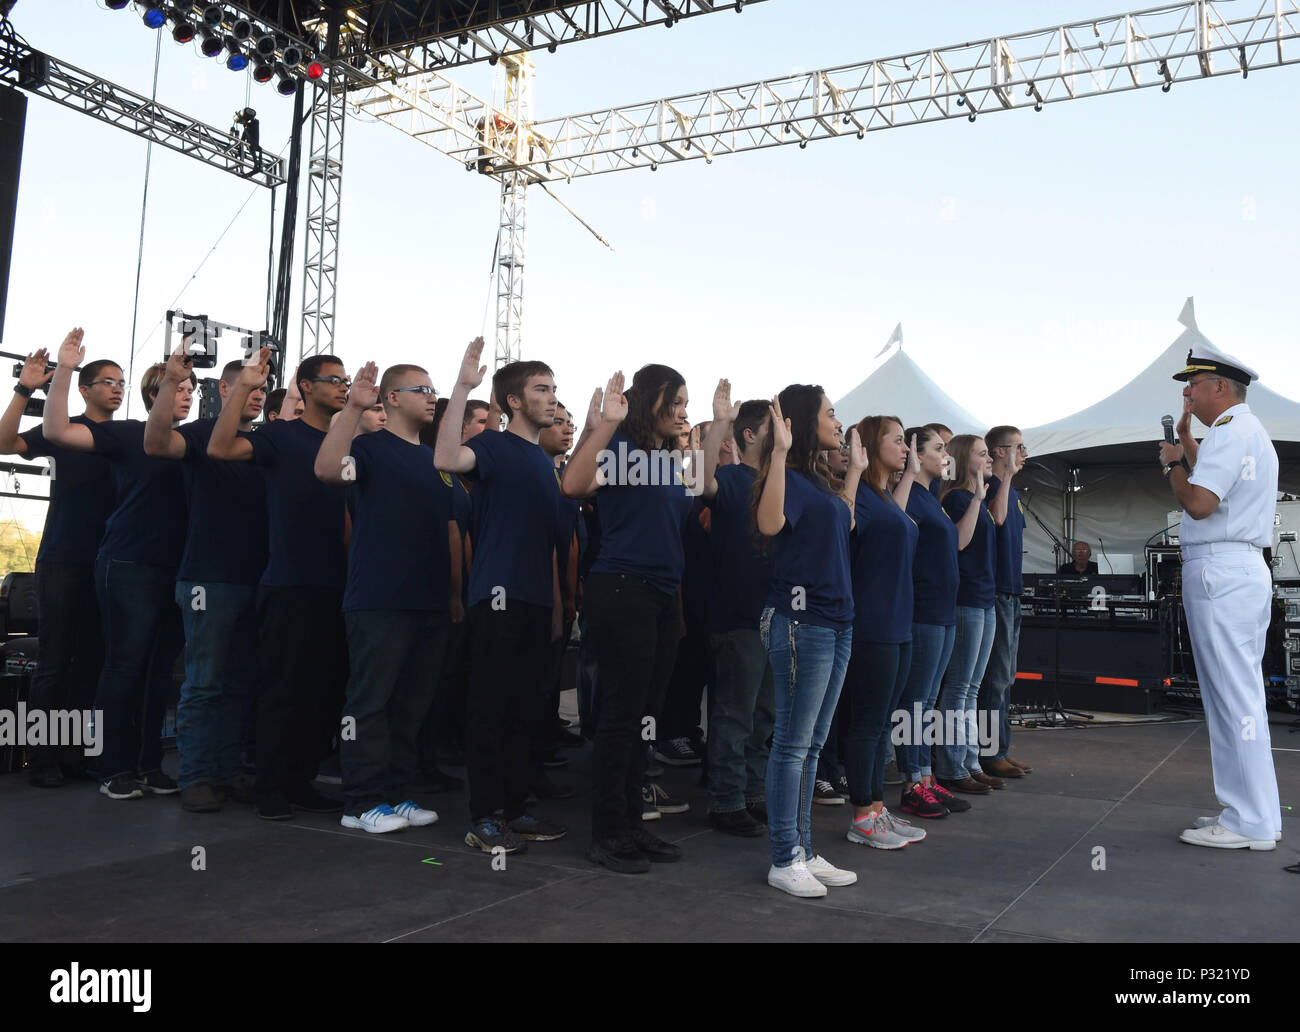 BOISE, Idaho (August 23, 2016) Rear Adm. Bruce Gillingham, Commander, Navy Medicine West administers the oath of enlistment to 40 Delayed Entry Program members from Naval Recruiting District Portland during the Western Idaho Fair as part of Boise Navy Week. Navy Weeks focus a variety of outreach assets, equipment and personnel on a single city for a weeklong series of engagements with key influencers and organizations. (US Navy Photo by Mass Communication Specialist 1st Class Marie A. Montez)Released Stock Photo